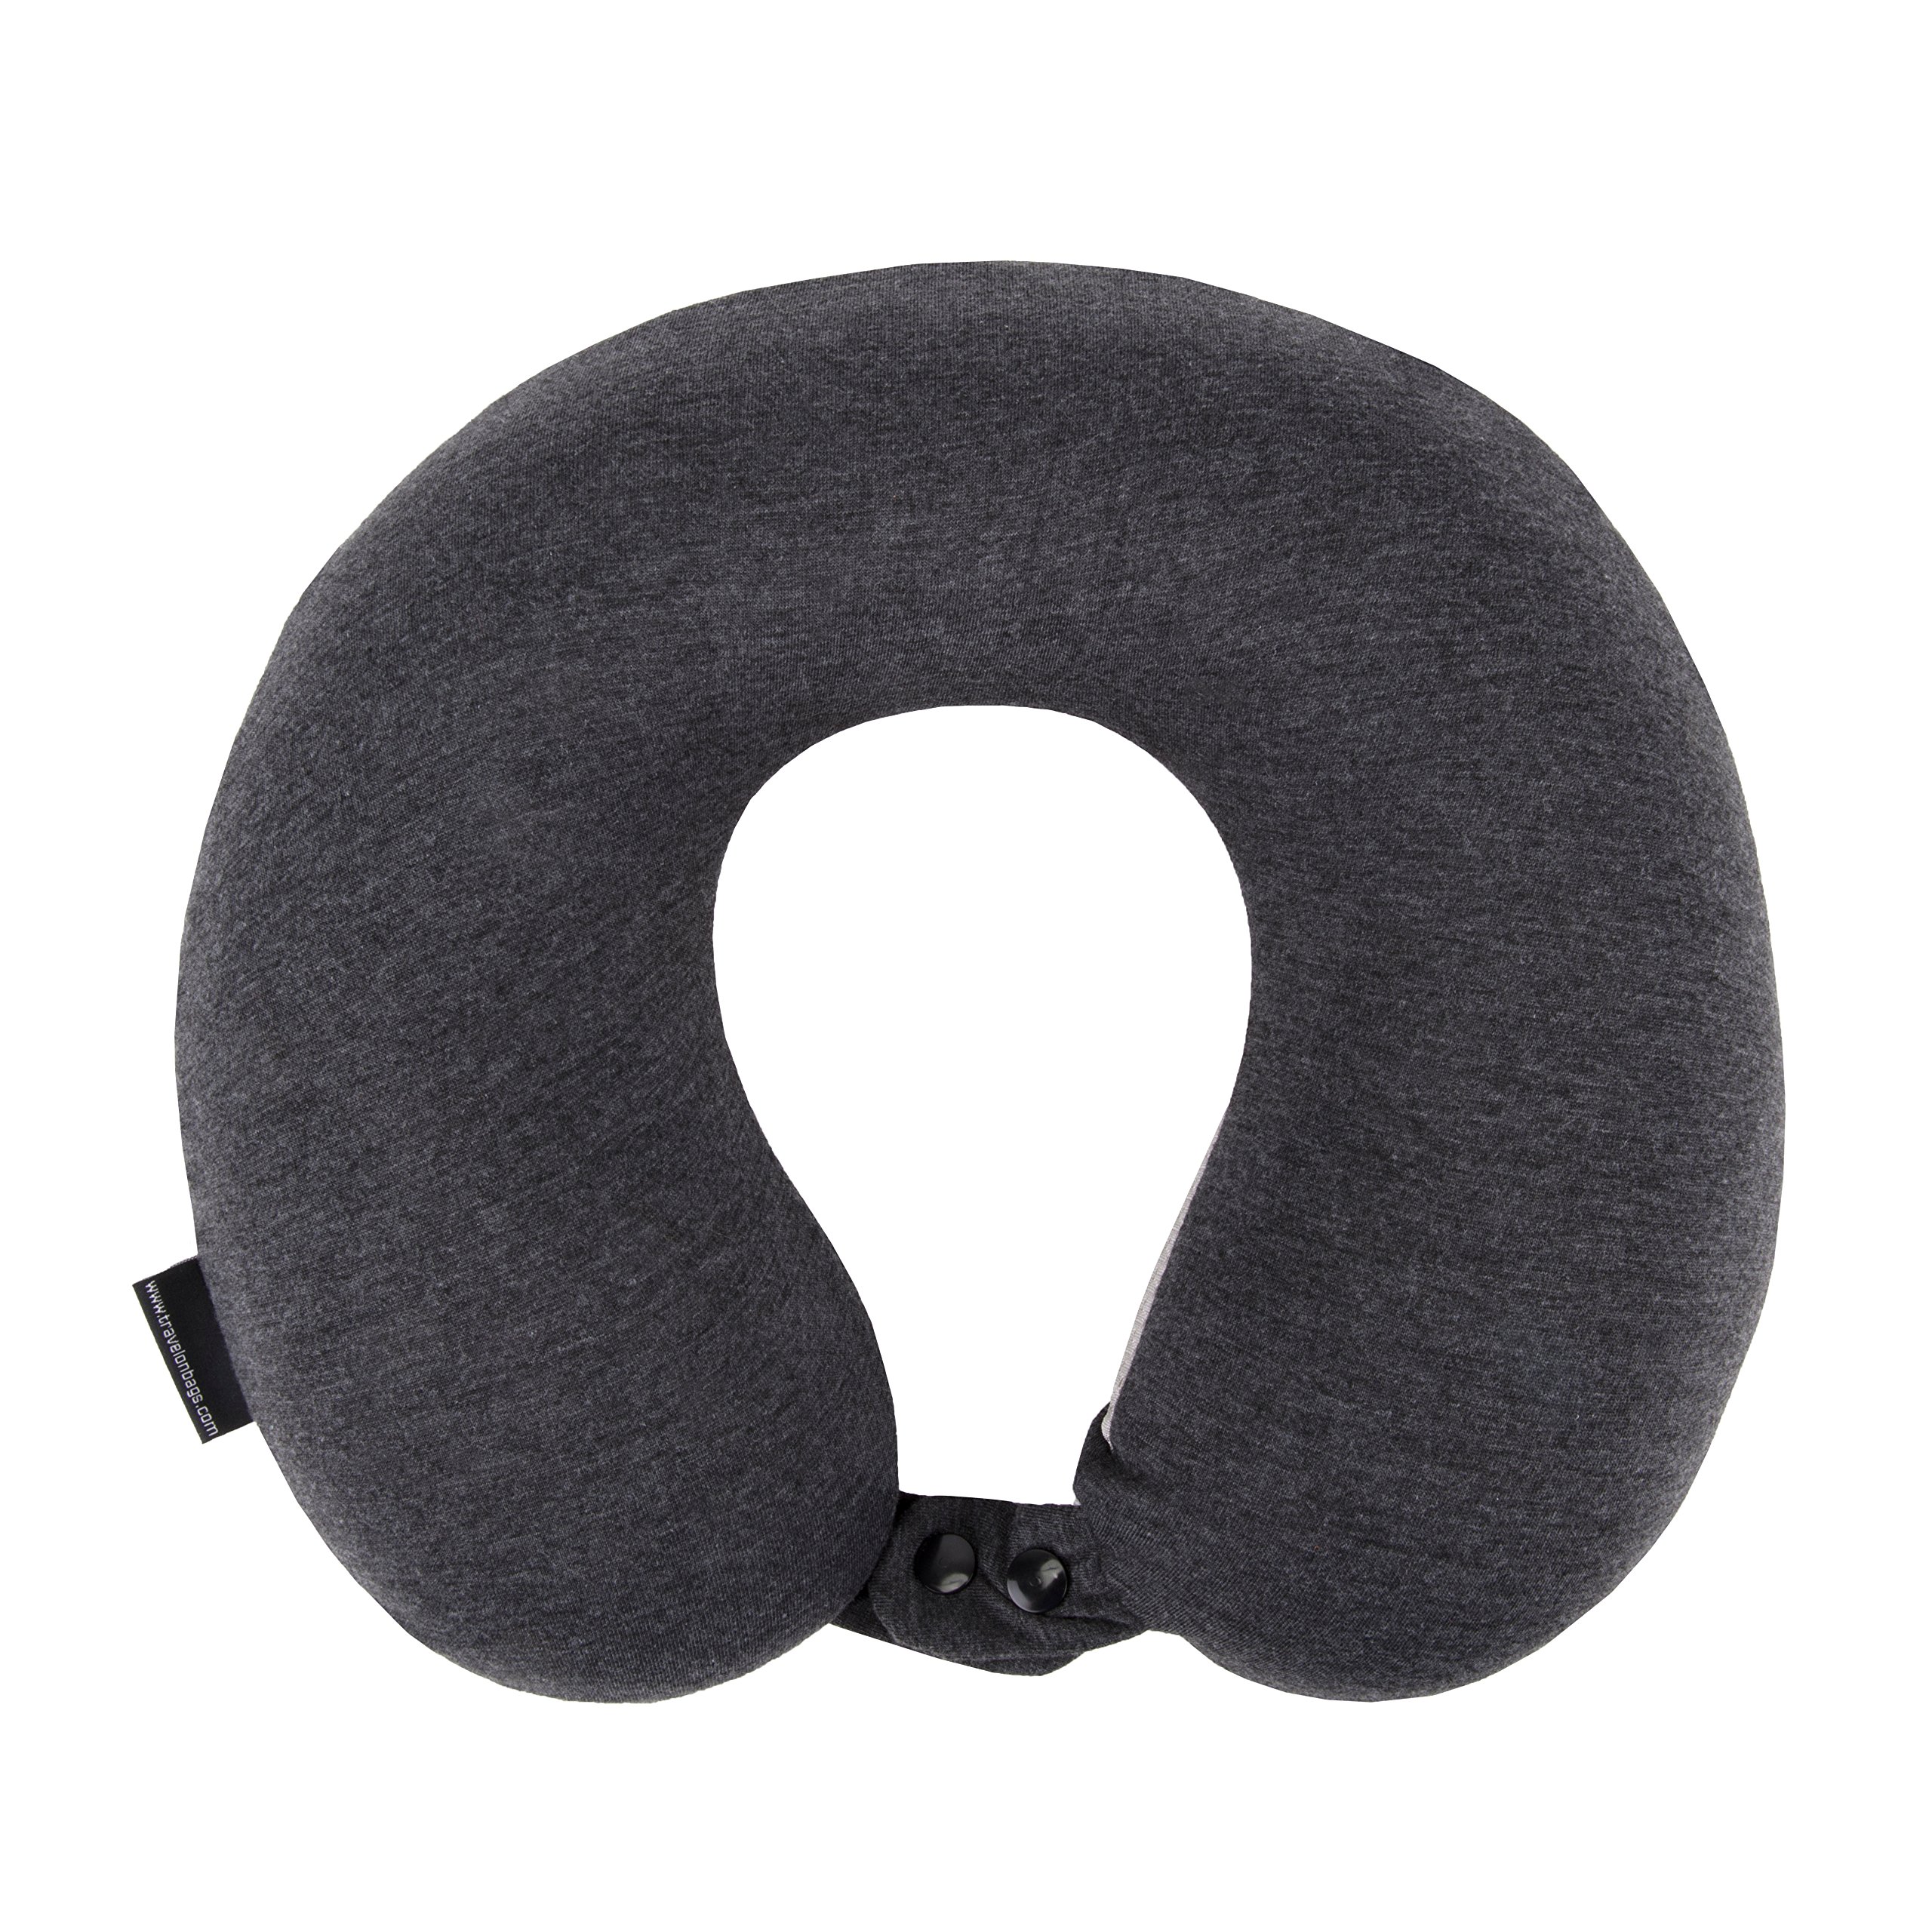 Travelon Cooling Gel Neck Pillow, Charcoal